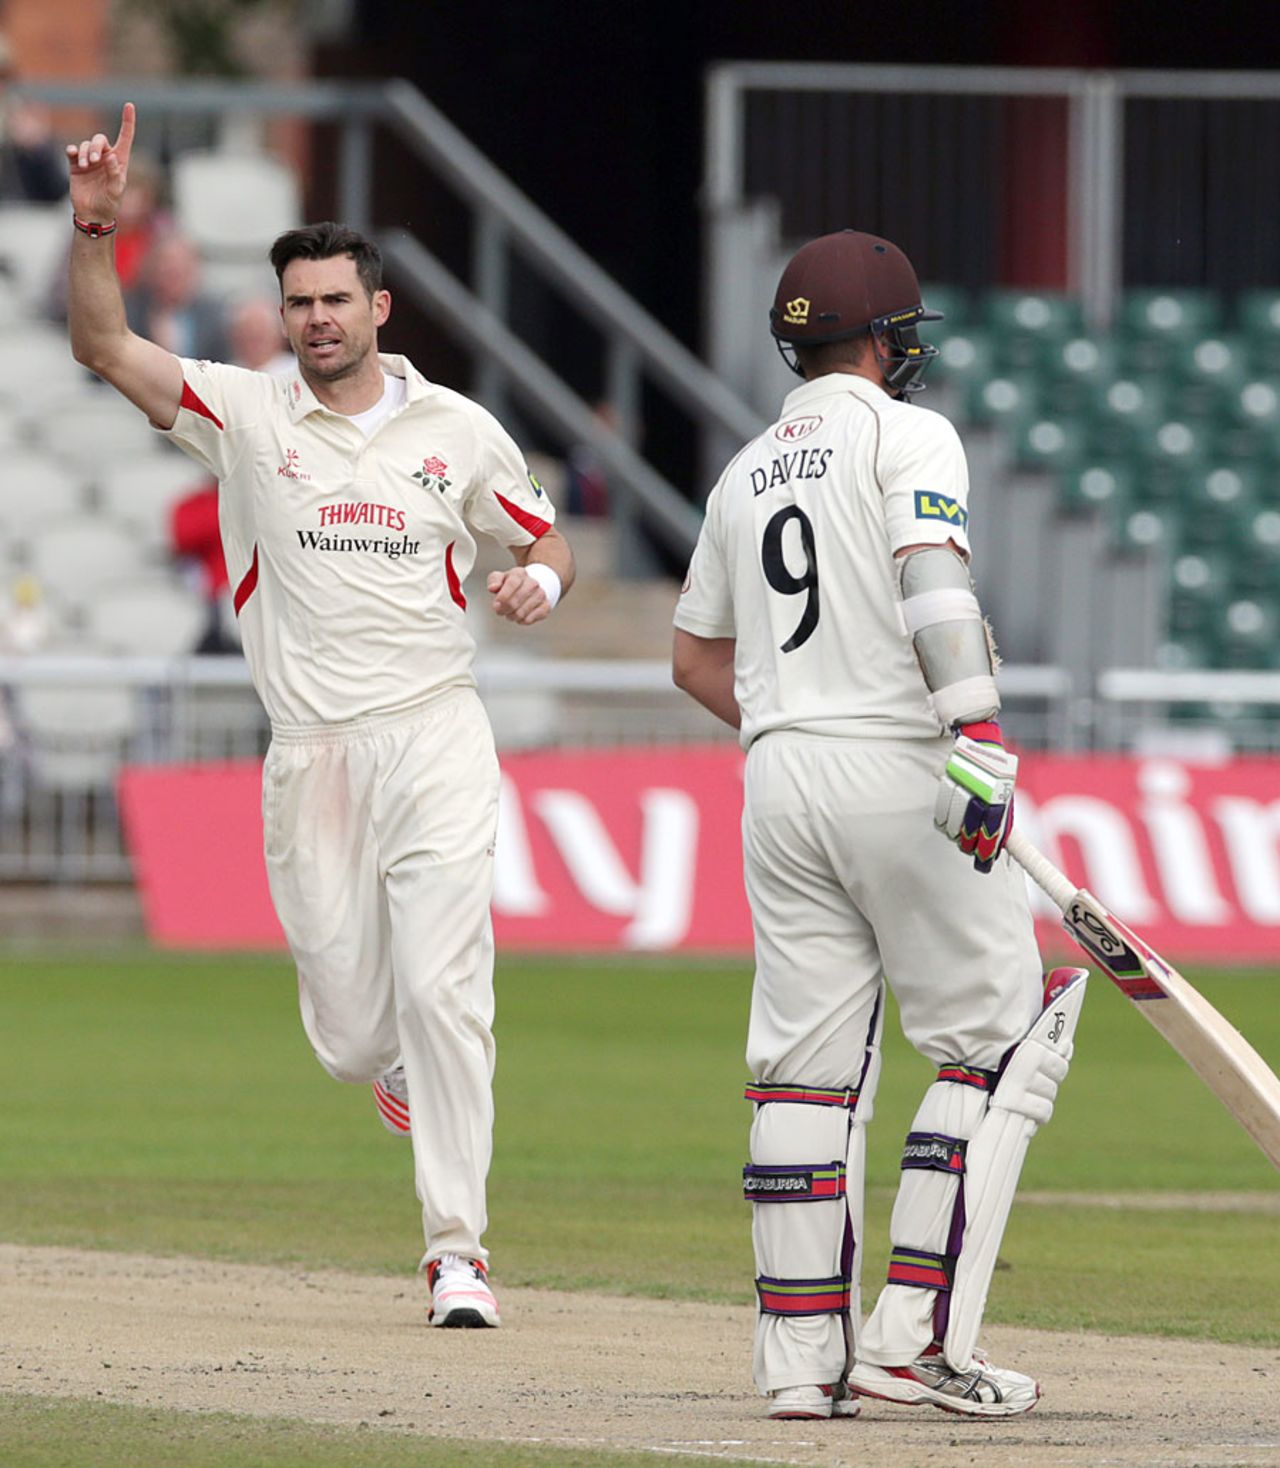 James Anderson collected his 700th first-class wicket, Lancashire v Surrey, LV= County Championship, Division Two, Old Trafford, 2nd day, September 15, 2015